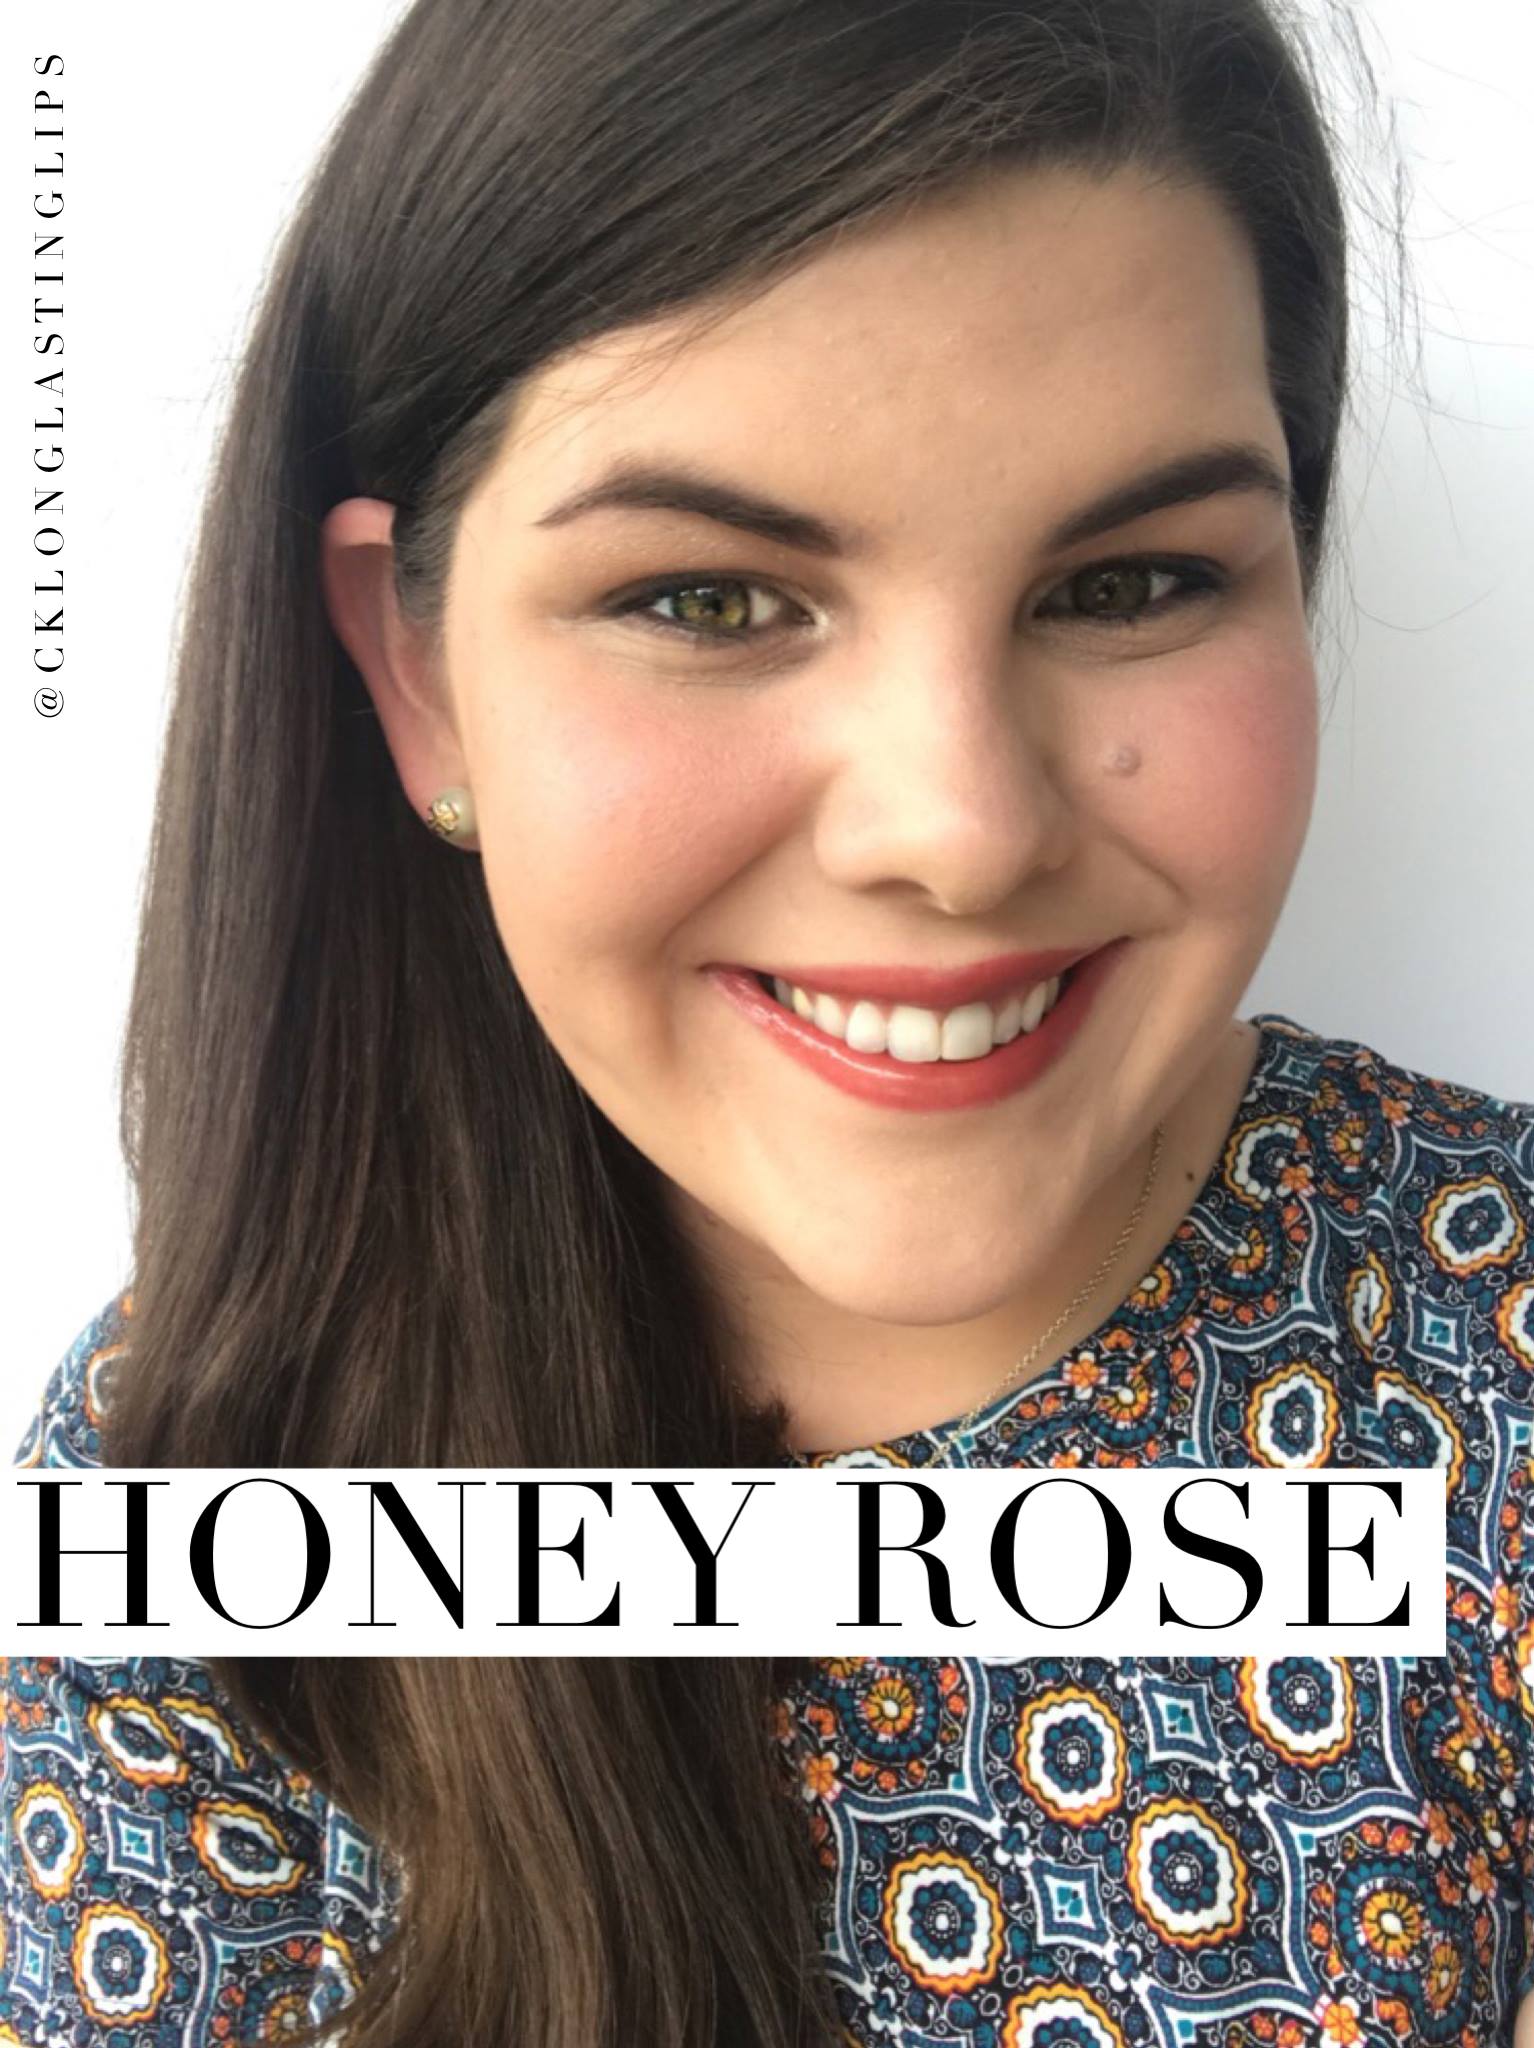 Honey Rose - - I love this long lasting lipstick. Water-proof, smudge proof & kiss proof www.carleykelley.com